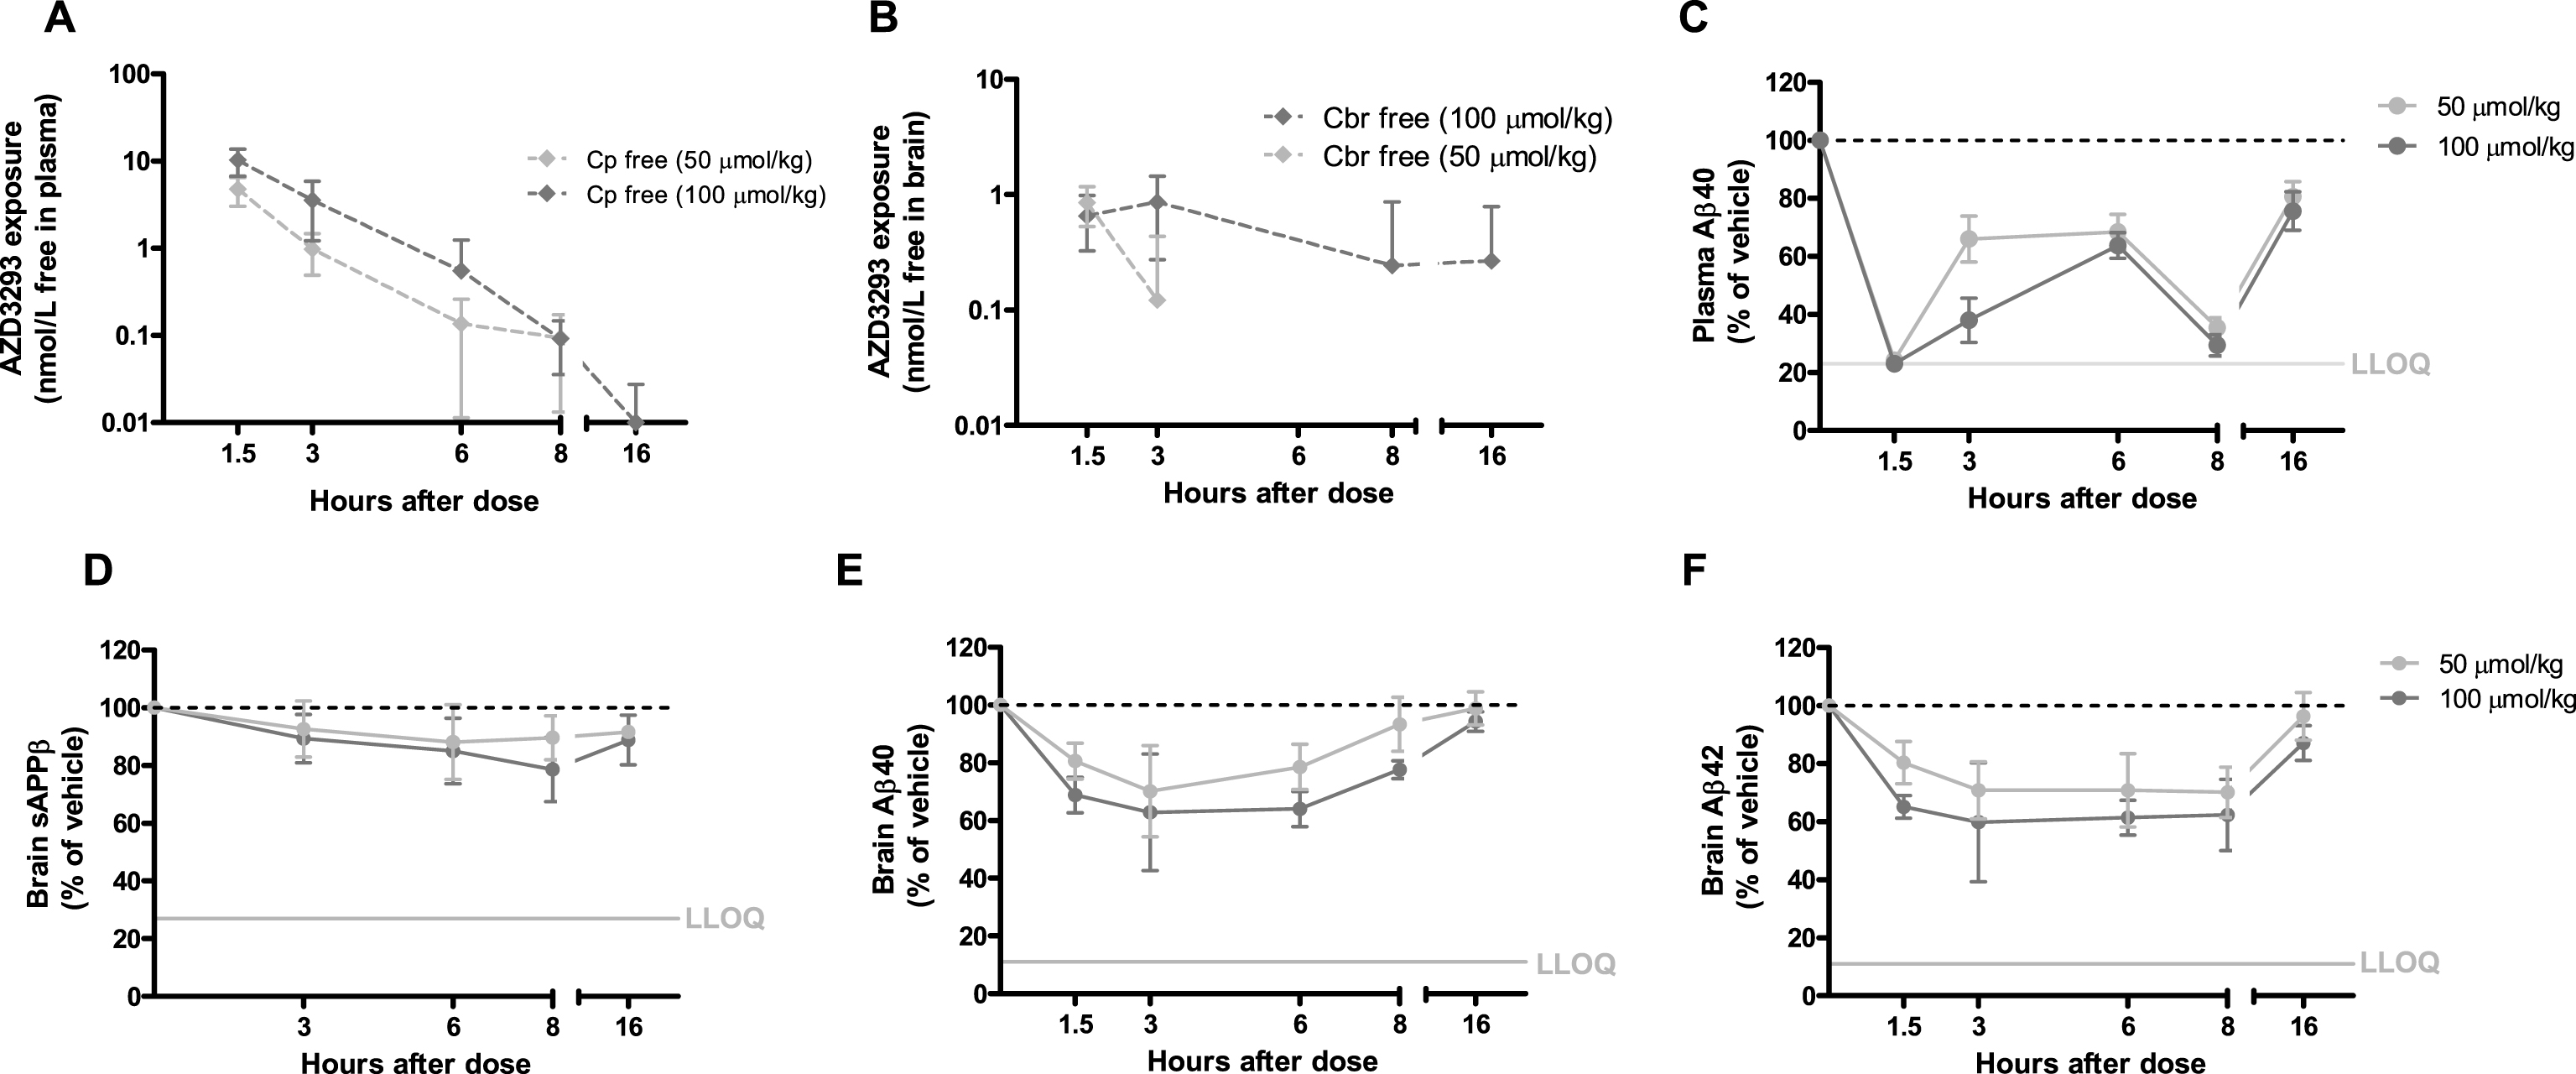 Time- and dose-dependent inhibition of Aβ generation in C57BL/6 mice. After a single oral administration of AZD3293, free plasma AZD3293 concentration (Cp free) peaked around 1.5 h after dosing (A). Free brain AZD3293 concentrations (Cbr free) peaked between 1.5 and 3 h after administration; all samples were above the lower limit of quantification (LLOQ) of the assay only at 1.5 h after the highest dose (100μmol/kg; B). All doses tested (50, 100, and 200μmol/kg [not shown]) reduced plasma Aβ40 to the LLOQ of the assay at 1.5 h after administration. Time-response data showed that the plasma Aβ40 concentrations were reduced ≥40% 1.5 to 8 h after AZD3293 administration. At 16 h after the dose, concentrations were returning to baseline but were still significantly reduced (C). At the high dose (100μmol/kg), brain sAβPPβ was significantly reduced from 3 to 8 h after administration (D). Brain Aβ40 and Aβ42 displayed dose-dependent (50, 100, and 200μmol/kg [not shown]) reductions 1.5 h after dosing (E and F). Brain Aβ40 and Aβ42 concentrations were significantly reduced at all timepoints studied, except at 16 h where the concentrations had returned to baseline (E and F). Data are presented as Mean±SEM.